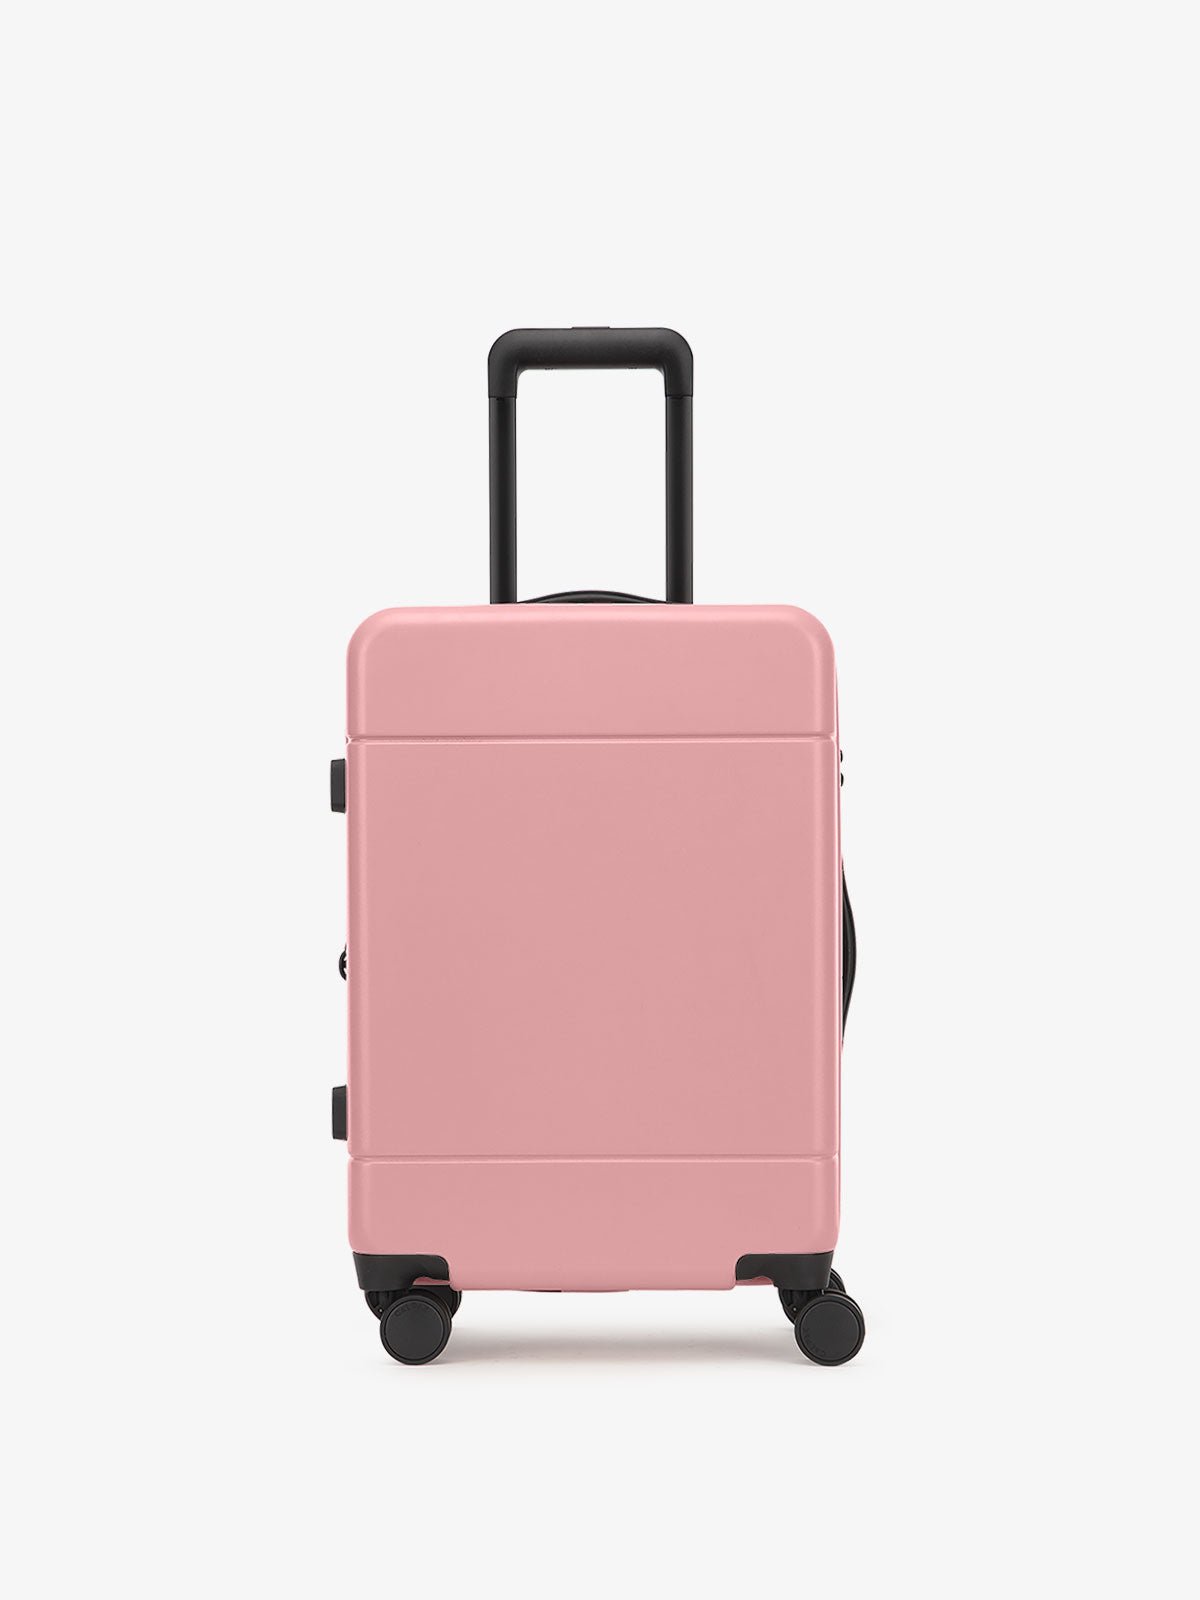 Hue hard shell rolling carry on luggage in light pink mauve